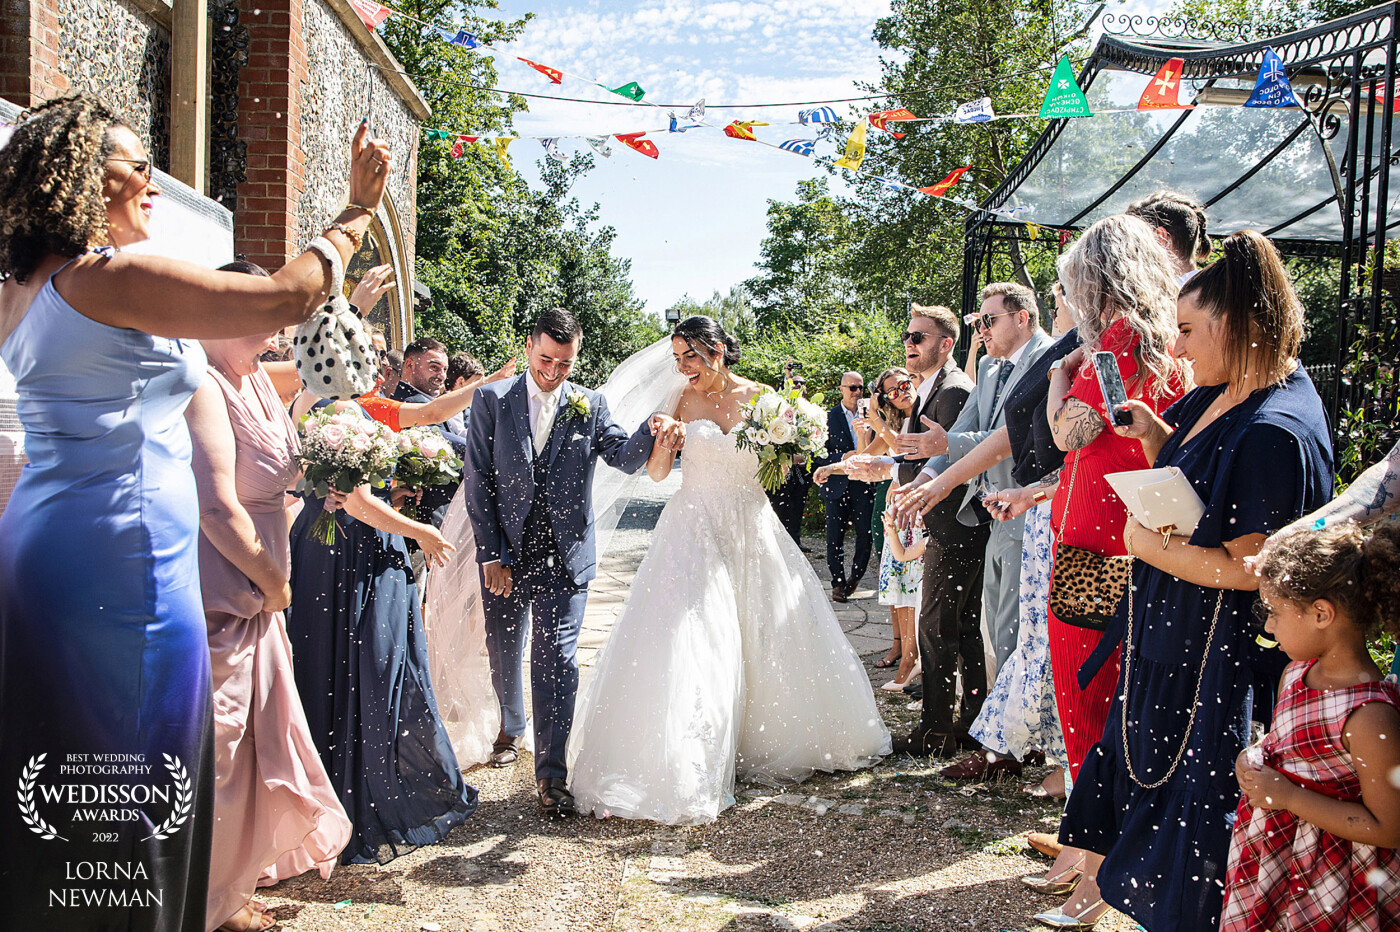 Irene & Gianni had the most beautiful Greek wedding ceremony followed by this explosive confetti shot as they left the 12 Apostles Church. The whole day was just amazing !